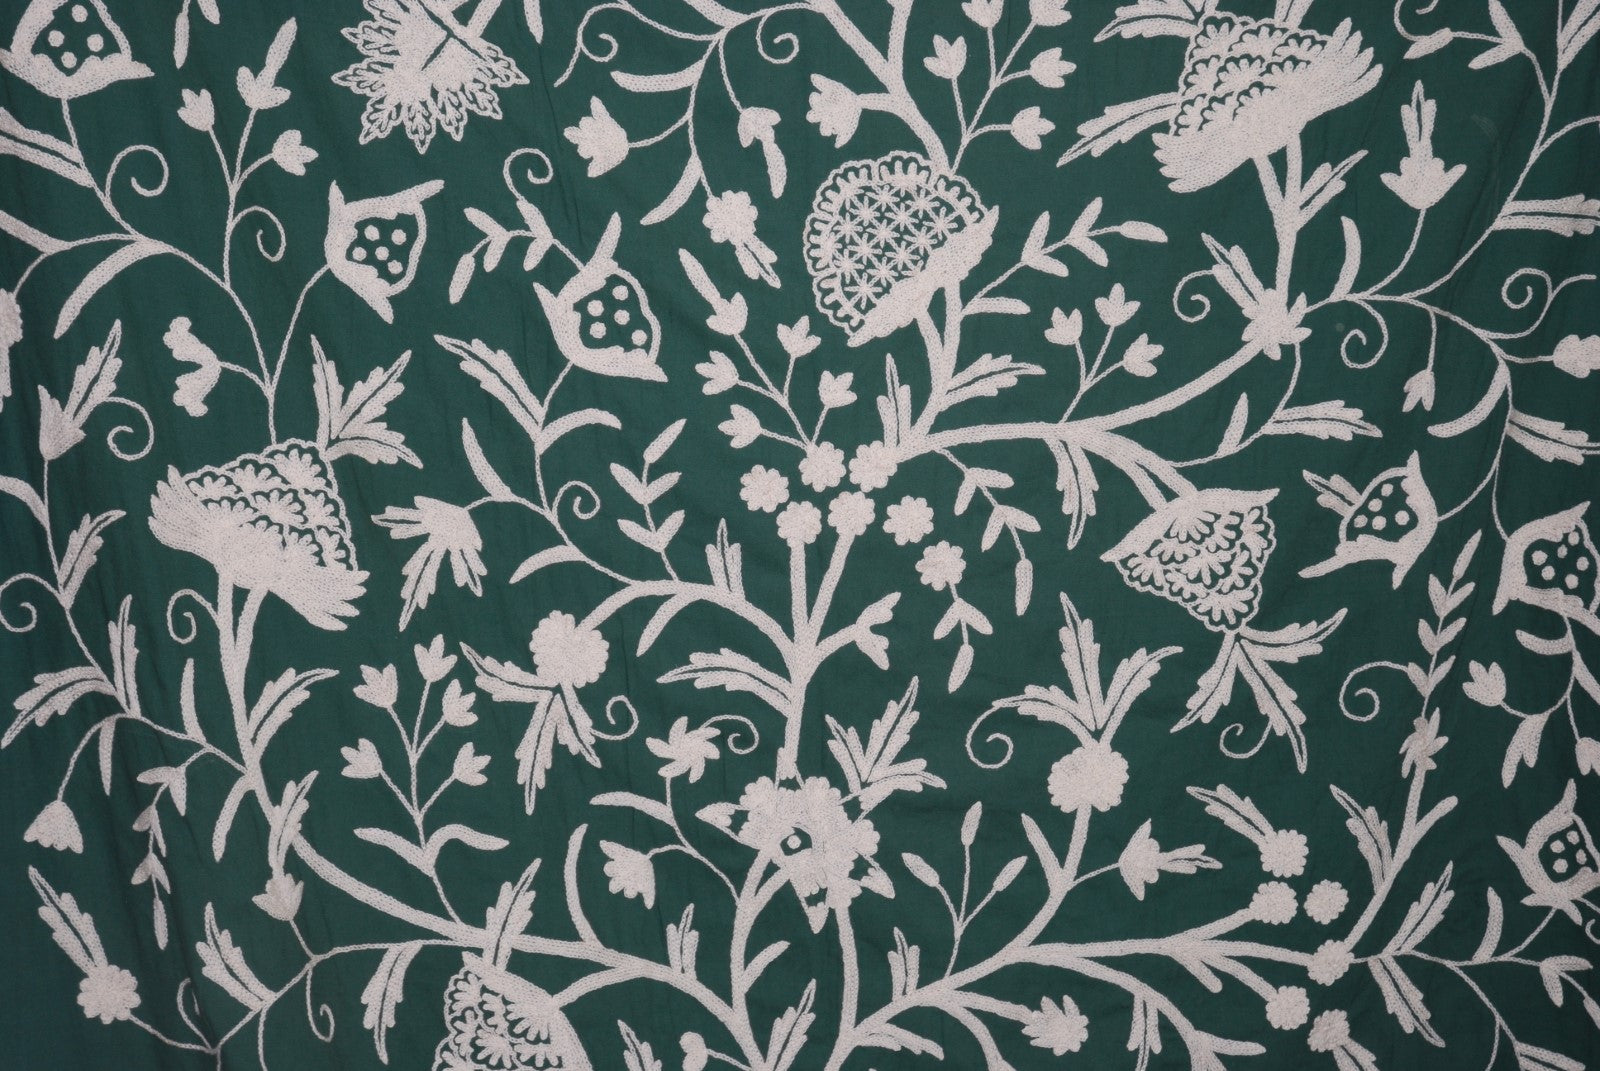 Cotton Crewel Embroidered Fabric Tree of Life, White on Green #DDR072